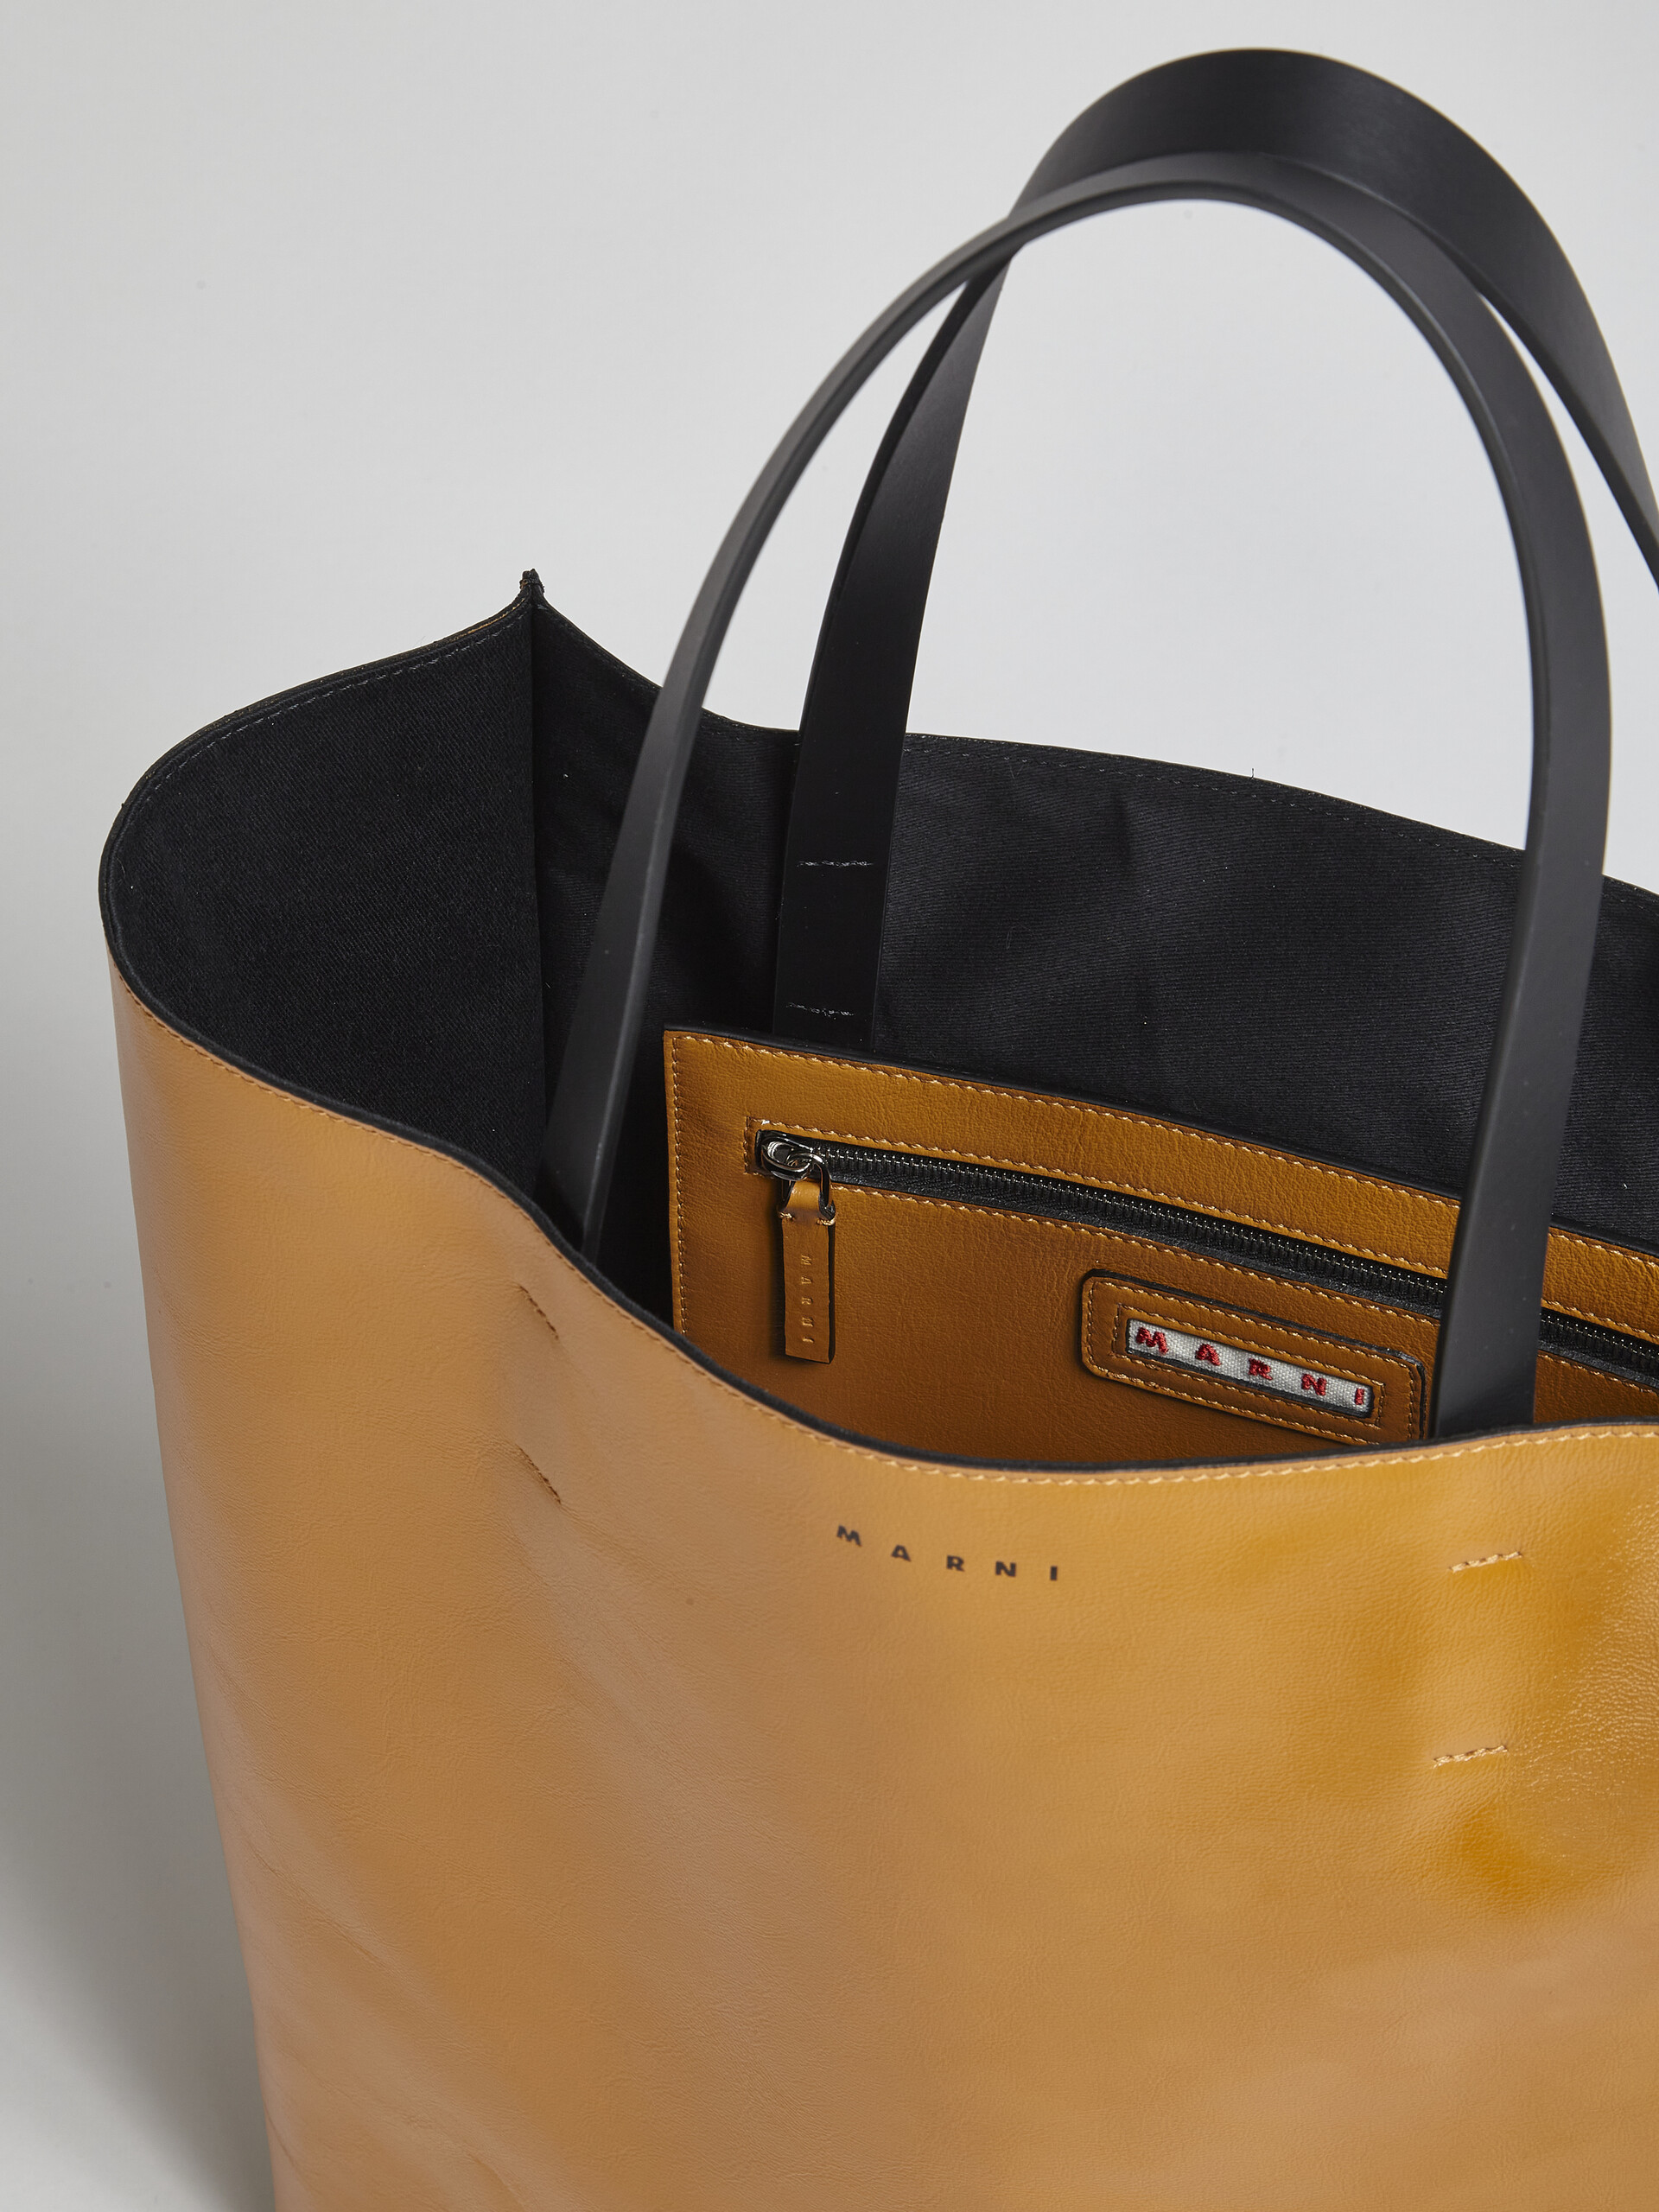 MUSEO SOFT bag in shiny brown and black leather - Shopping Bags - Image 3